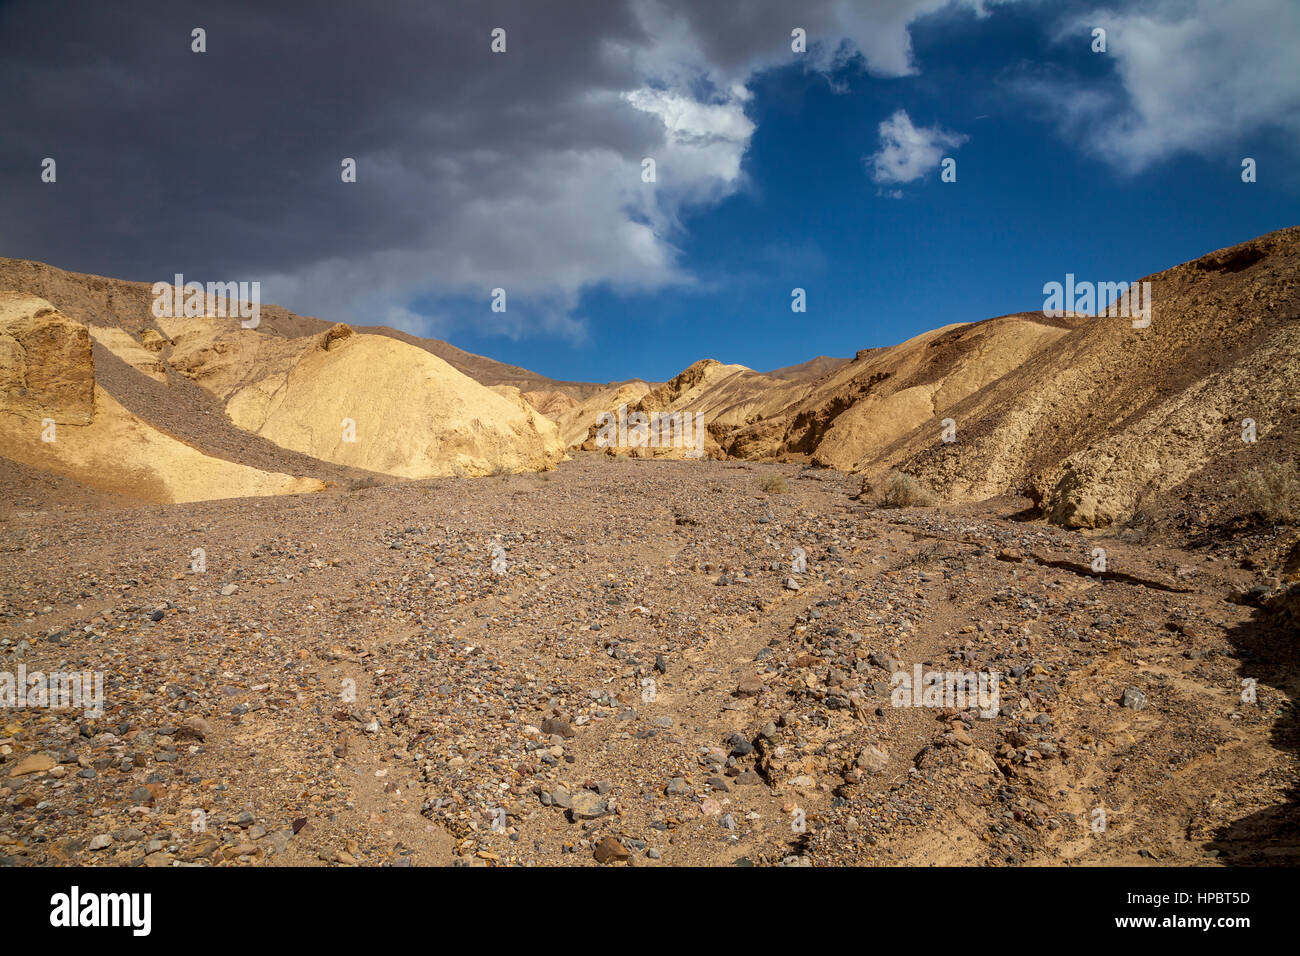 Clouds floating over mountain range, Death Valley National Park, California, USA Stock Photo